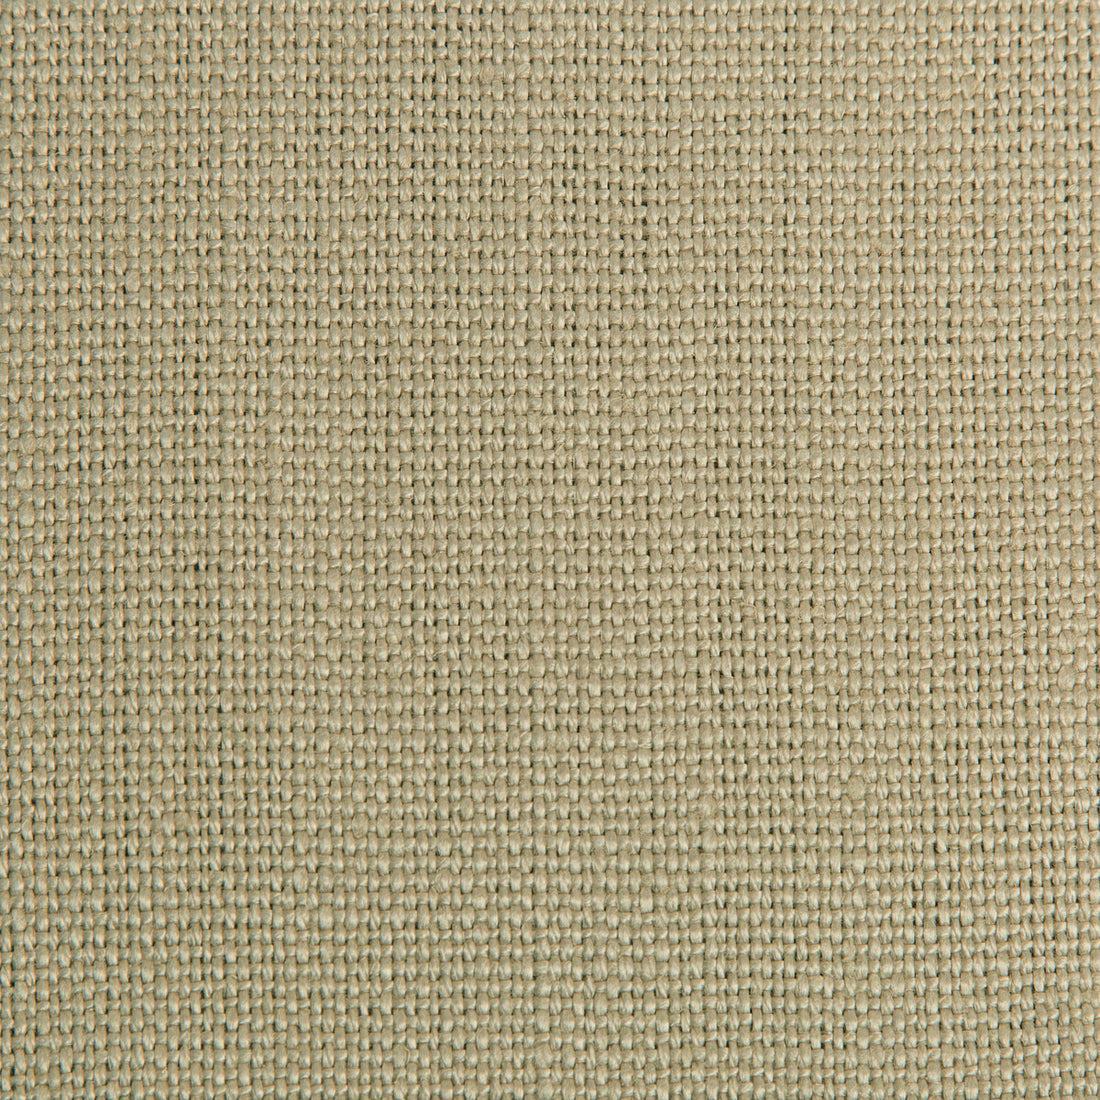 Hampton Linen fabric in pebble color - pattern 2012171.116.0 - by Lee Jofa in the Colour Complements II collection